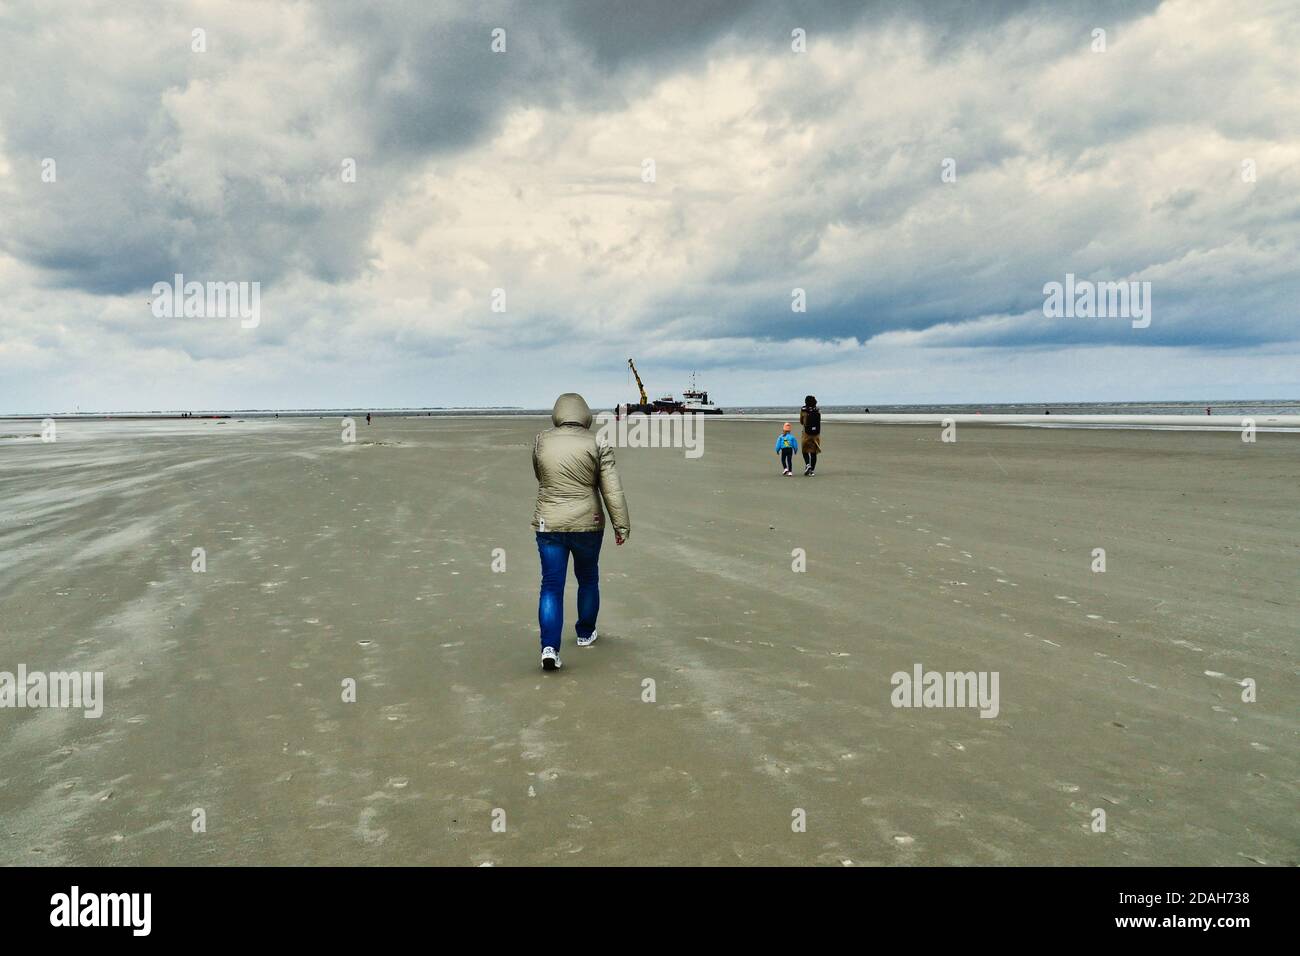 Epic clouds over beach with people walking in rear view. Extreme long shot. Stock Photo